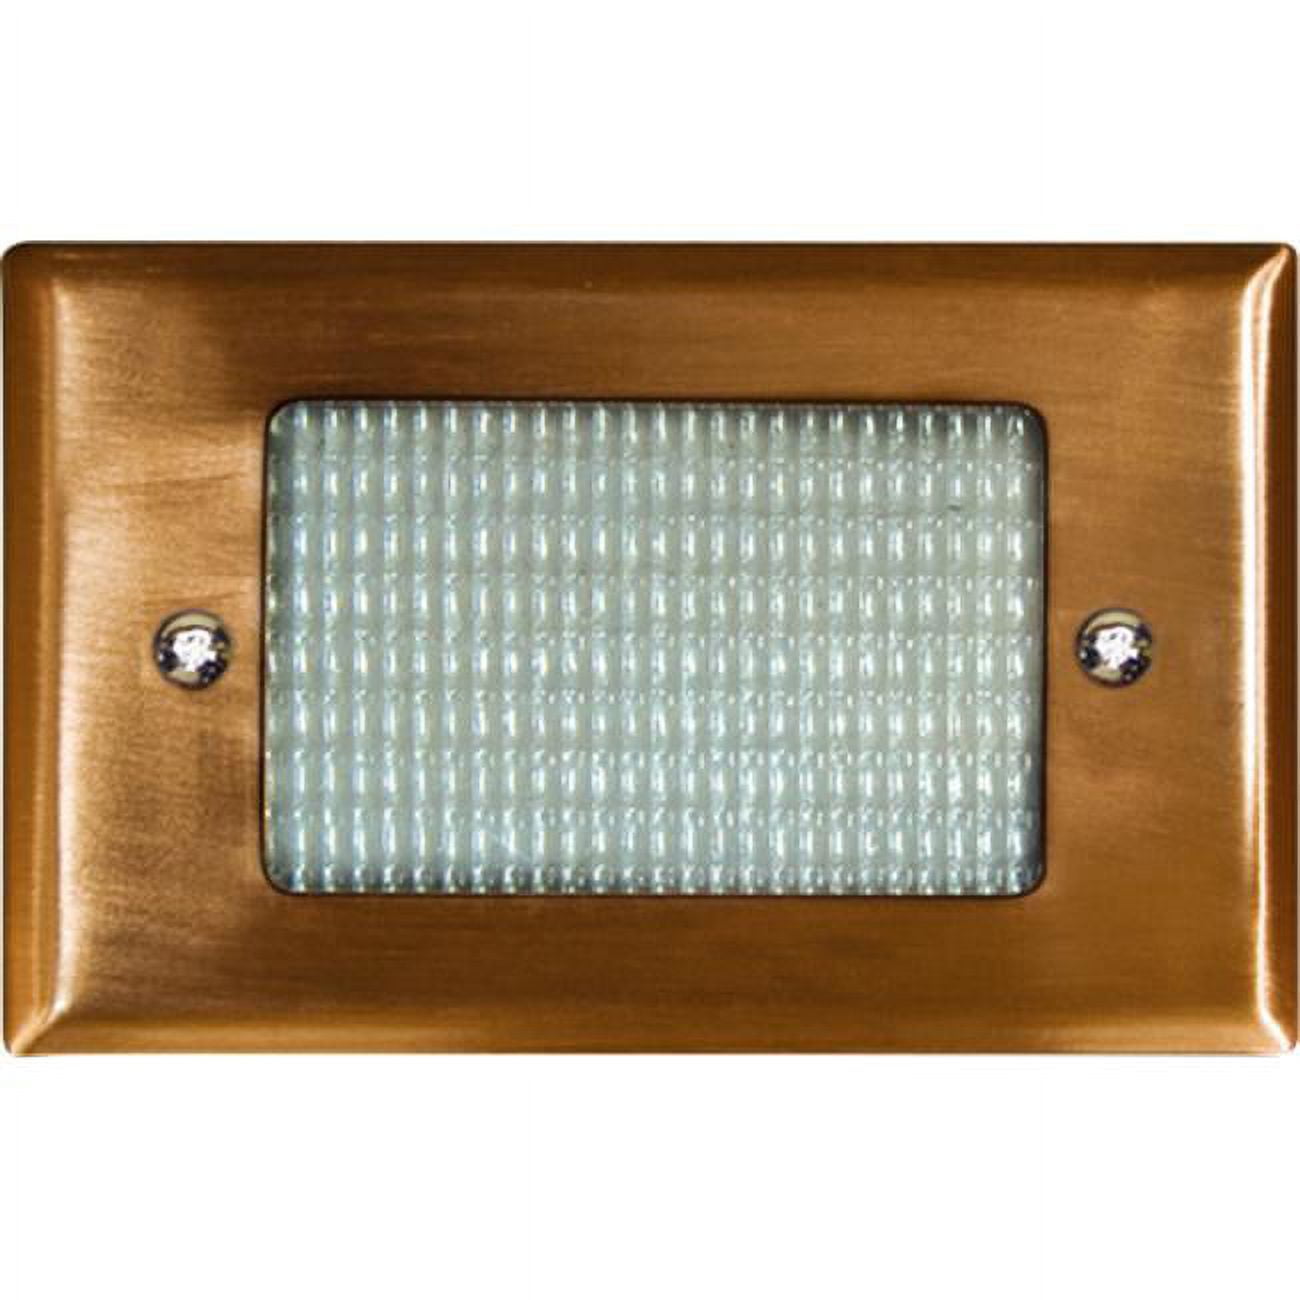 Picture of Dabmar Lighting LV618-CP Copper Recessed Open Face Brick, Step & Wall Light, Copper - 1.95 x 4.83 x 3.10 in.